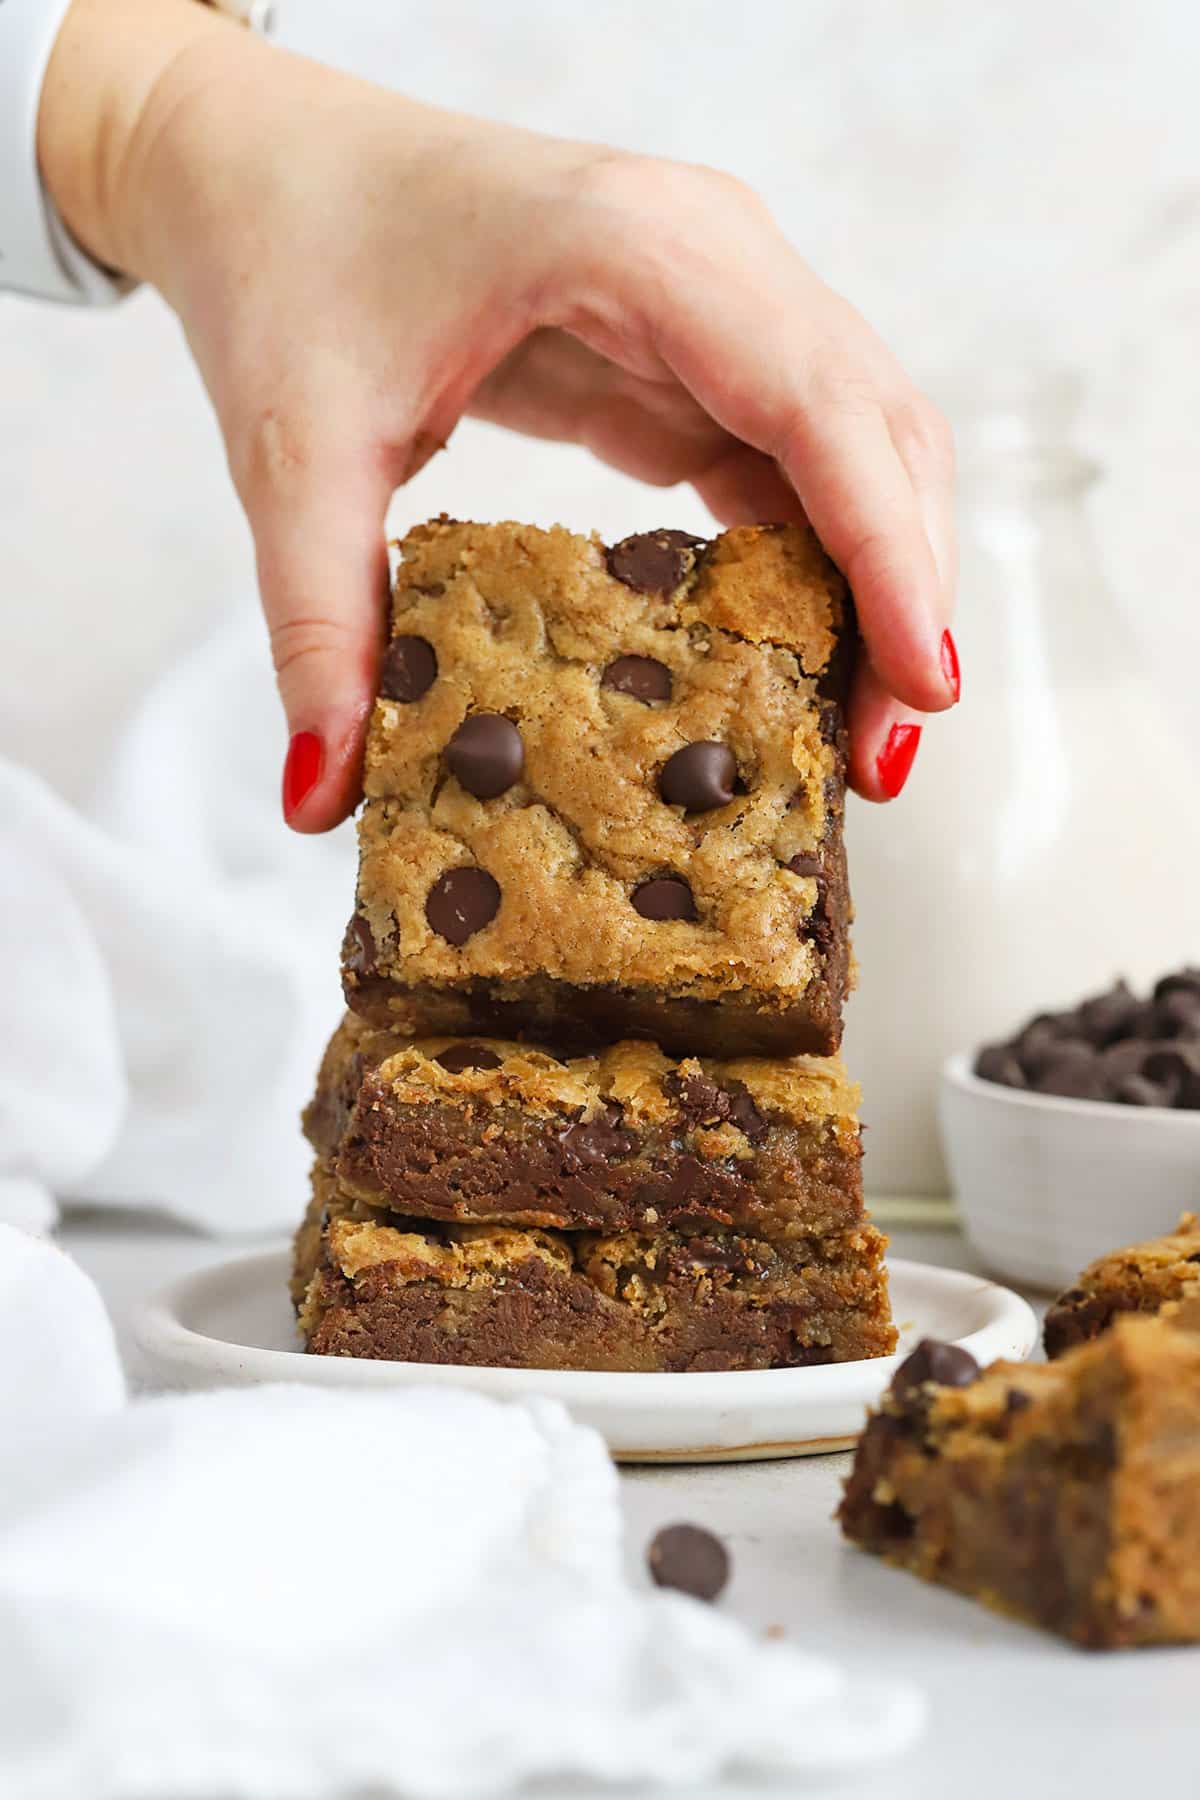 Our easy Gluten-Free Chocolate Chip Cookie Bars recipe is the perfect cookie bar for a crowd! We love the thick, chewy texture and plenty of chocolate in every bite! / gluten-free chocolate chip blondies / gluten free cookie bars / gluten free bar cookie / gluten-free blondie bars / gluten free blondies / gluten-free blondie recipe / gluten-free cookie bar recipe / easy gluten-free dessert / gluten-free cookie bars recipe